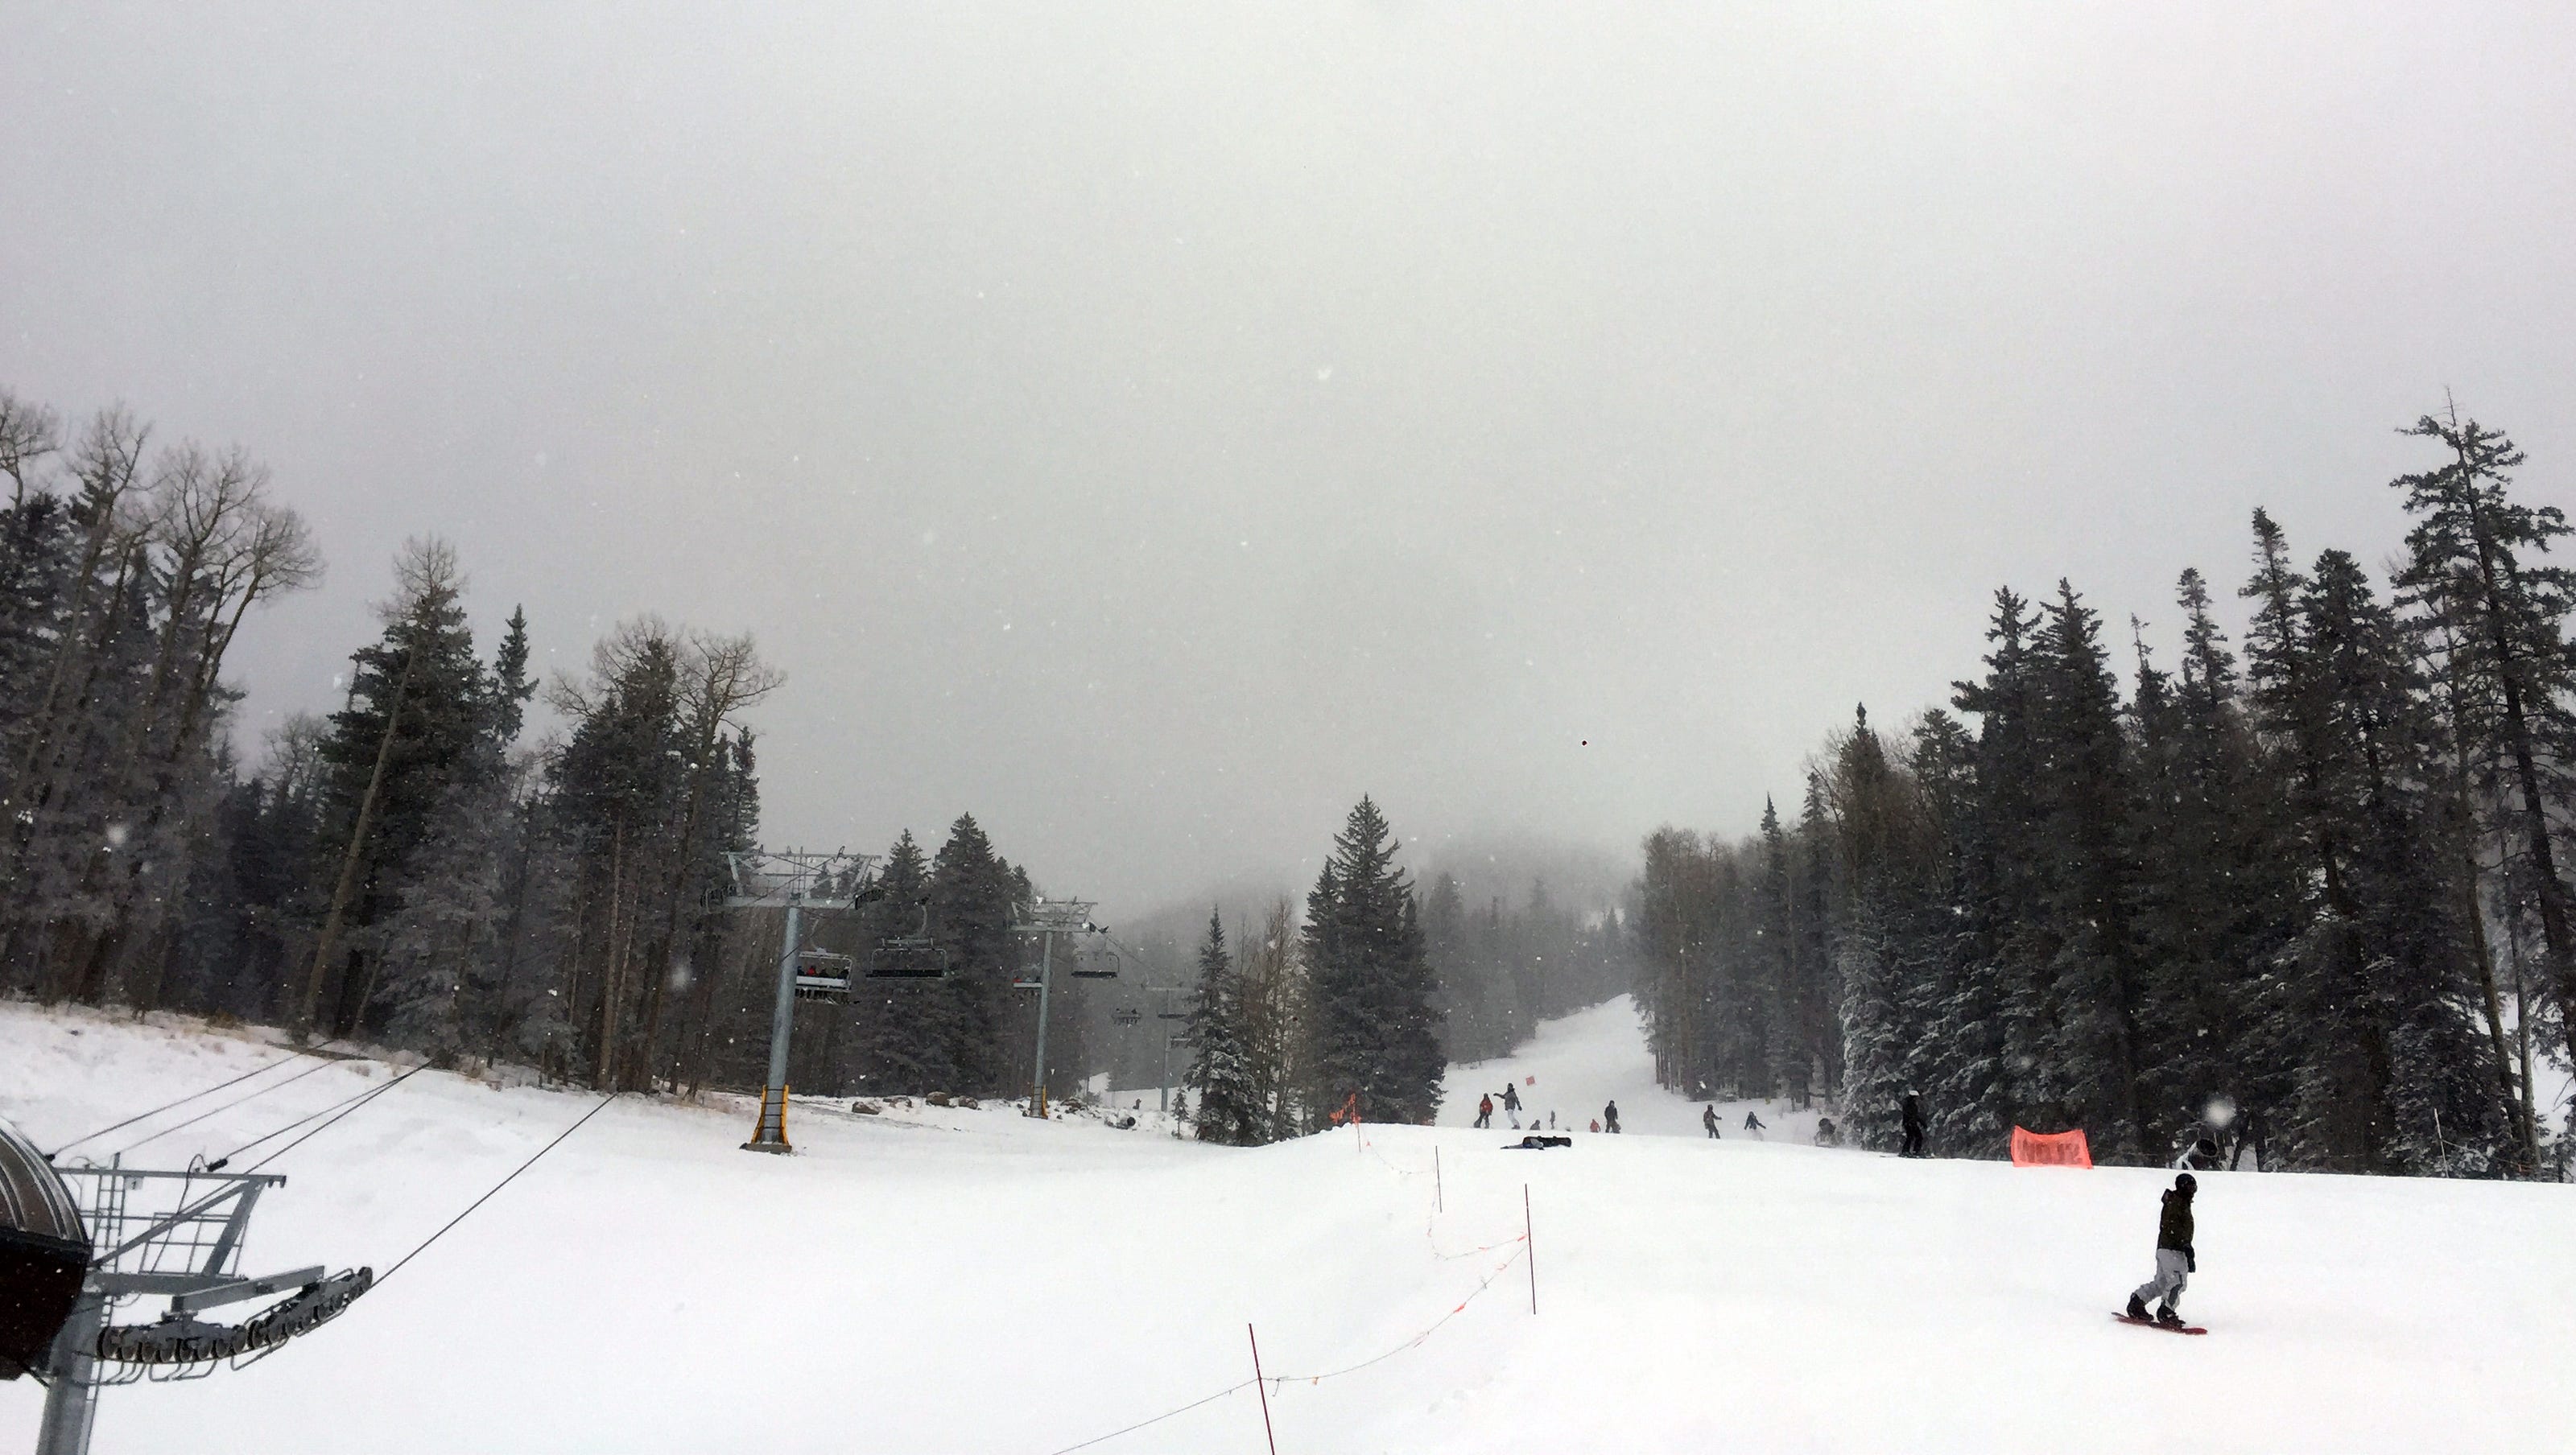 Flagstaff, northern Arizona to get hit Tuesday with heavy snowfall